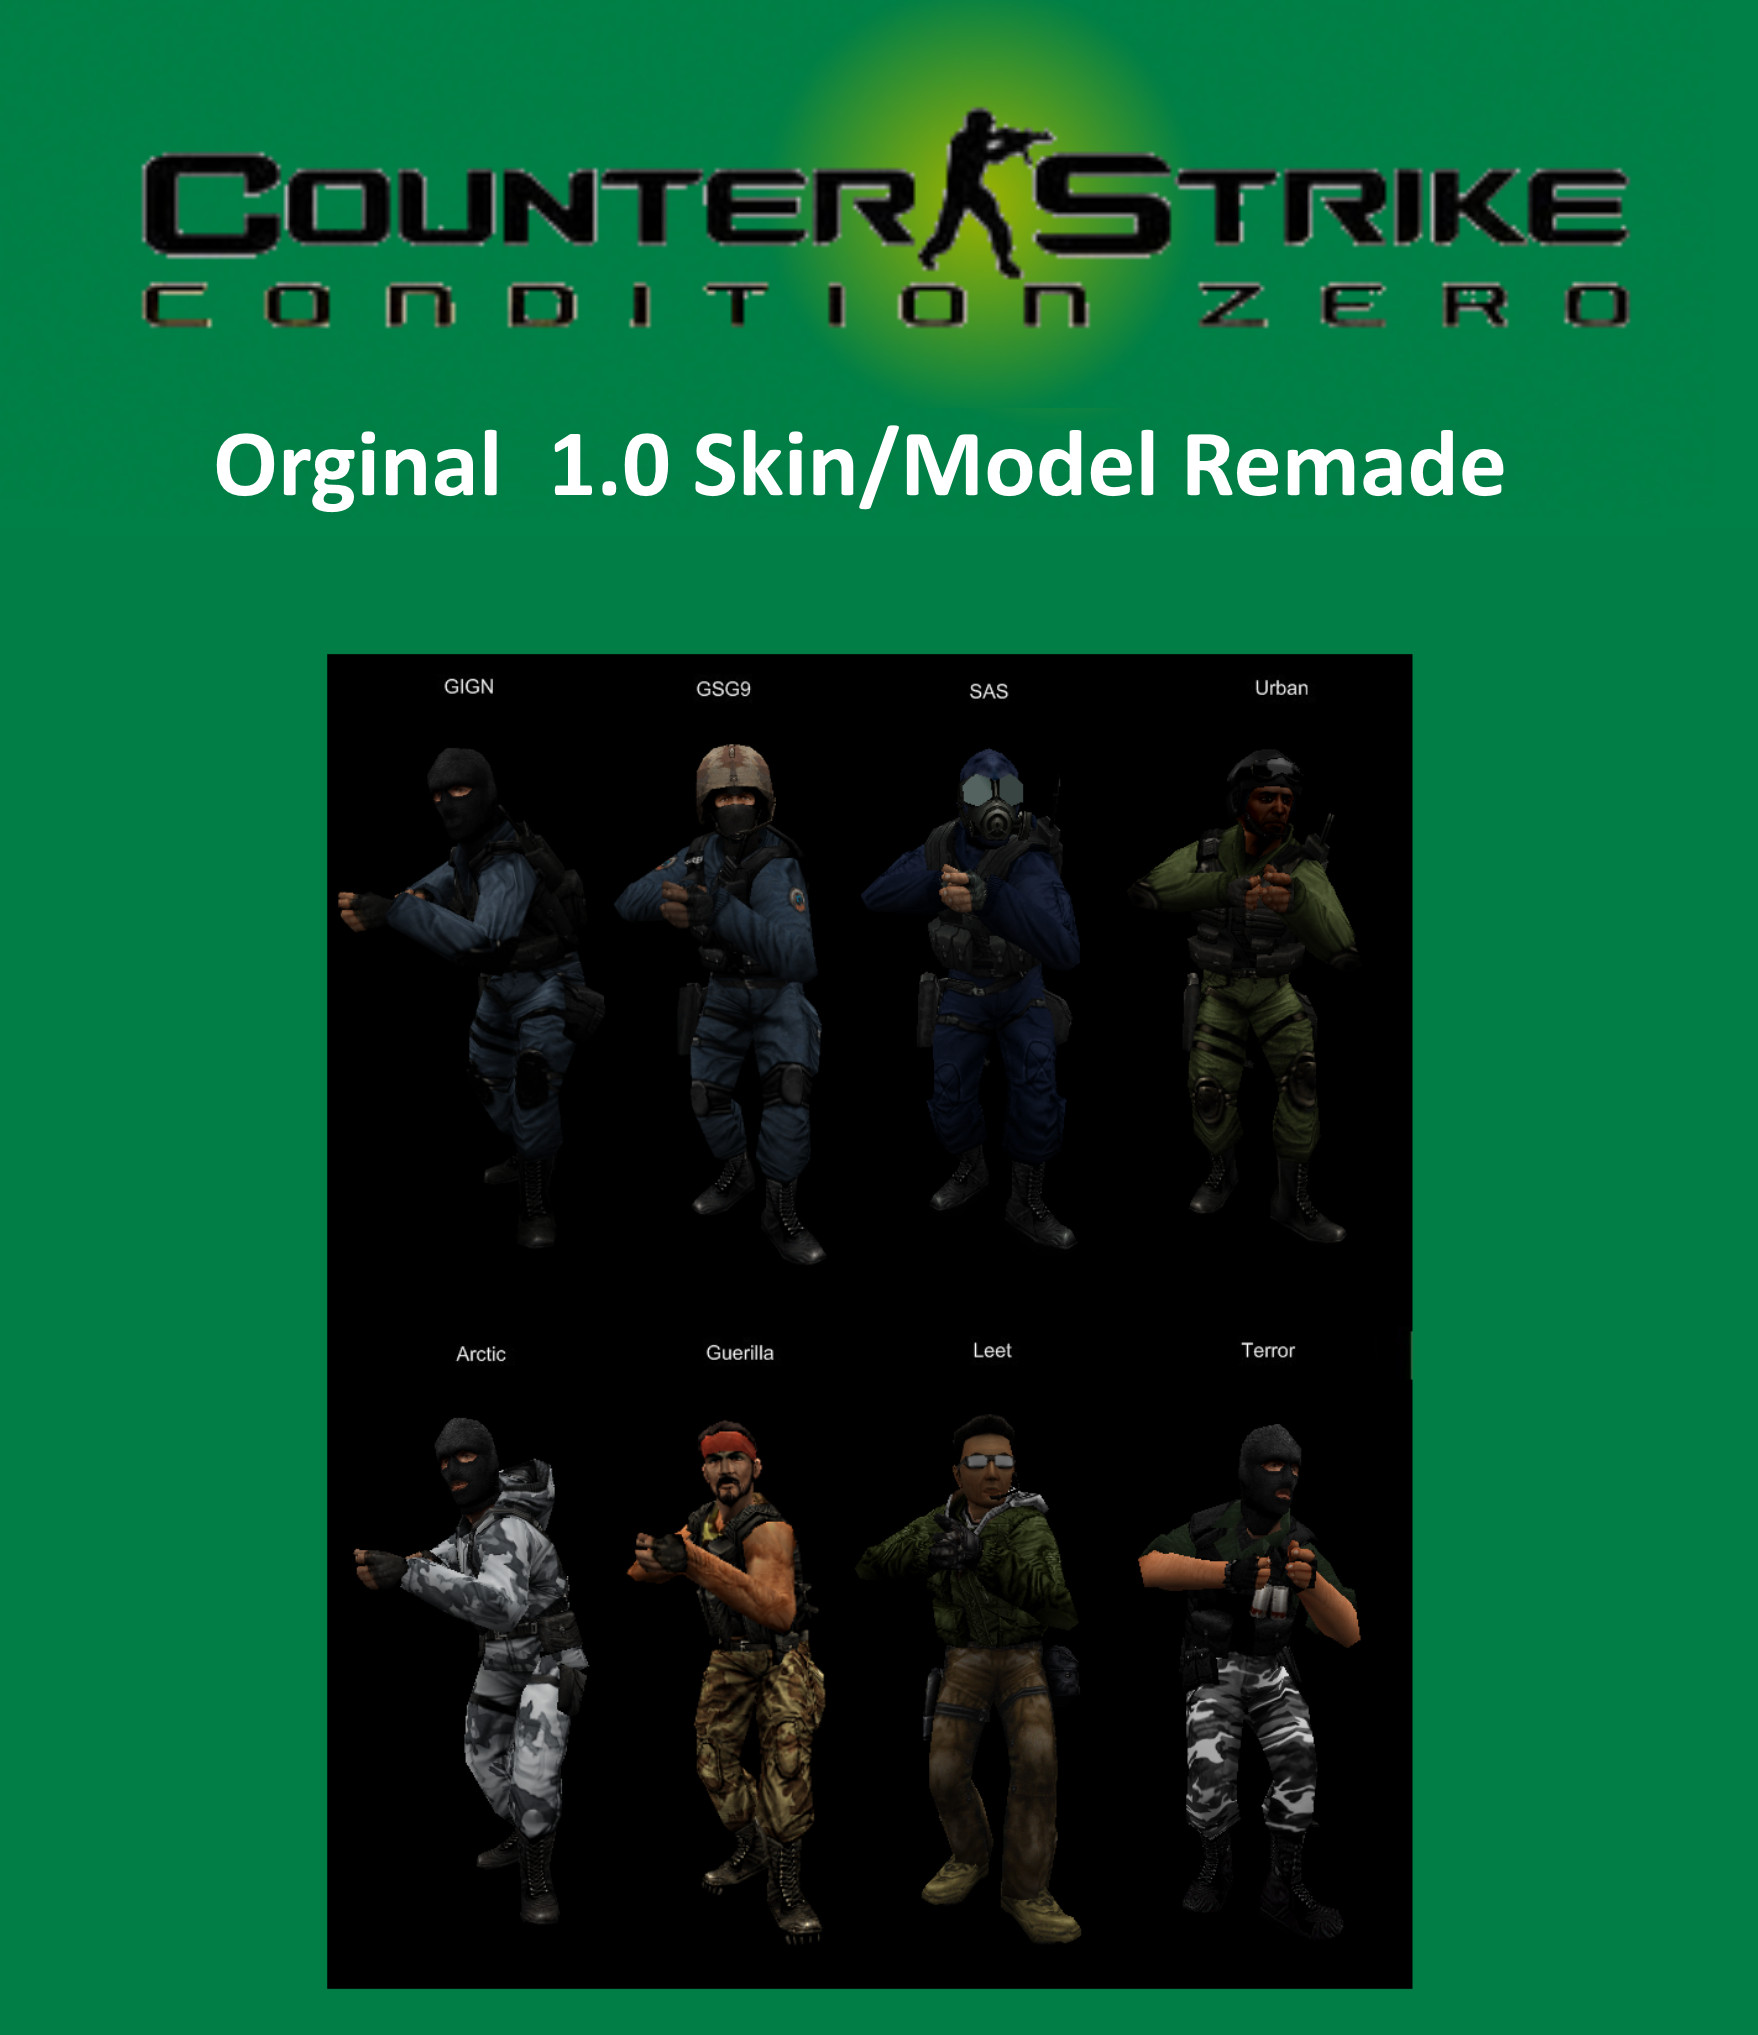 CS:CZ Gearbox Skins on Rituals Models [Counter-Strike: Condition Zero]  [Mods]